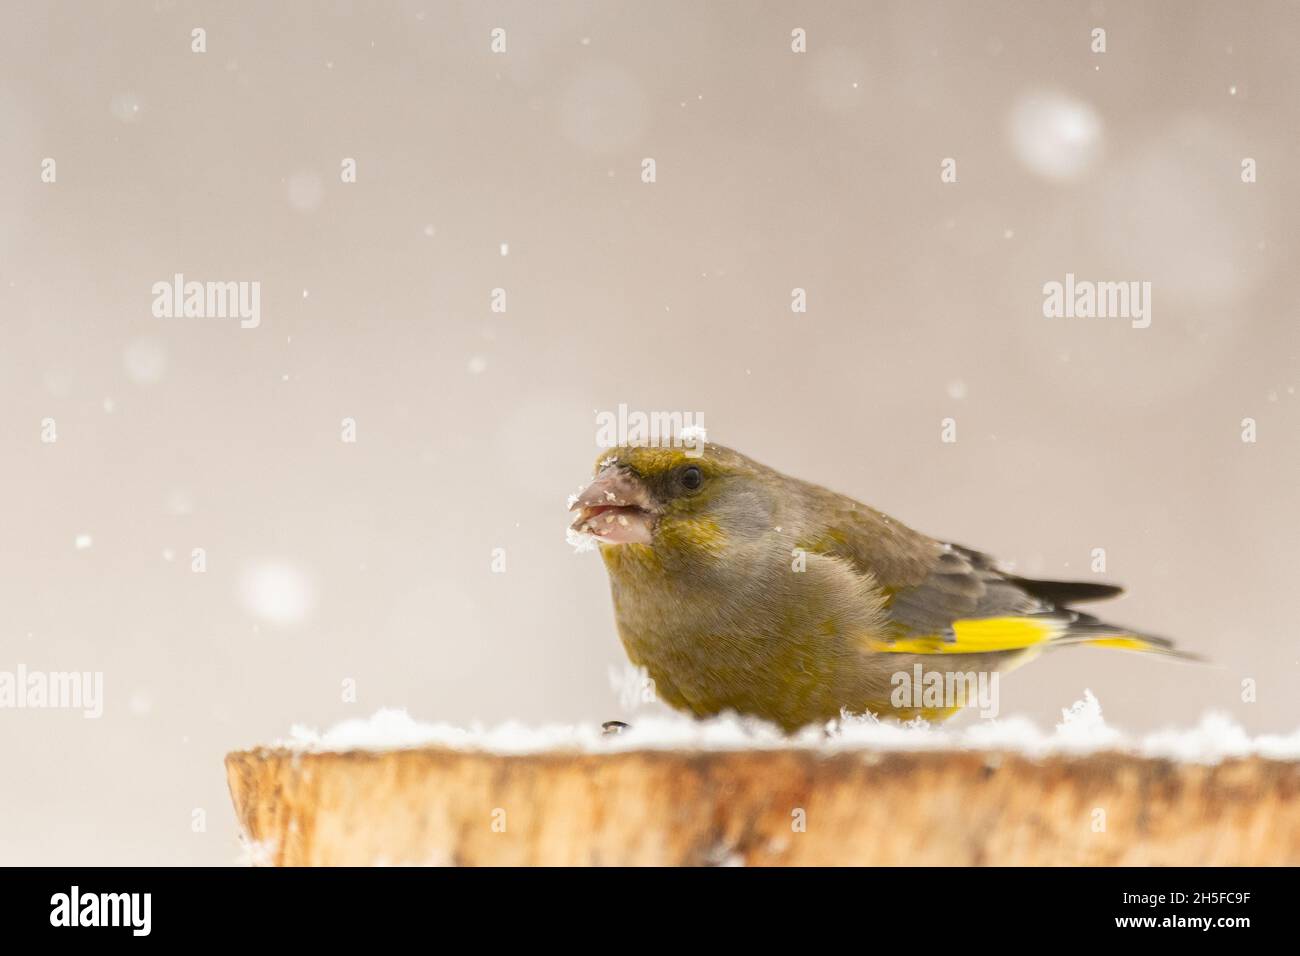 Bird Greenfinch Carduelis chloris perched on stump winter time, snow. Stock Photo